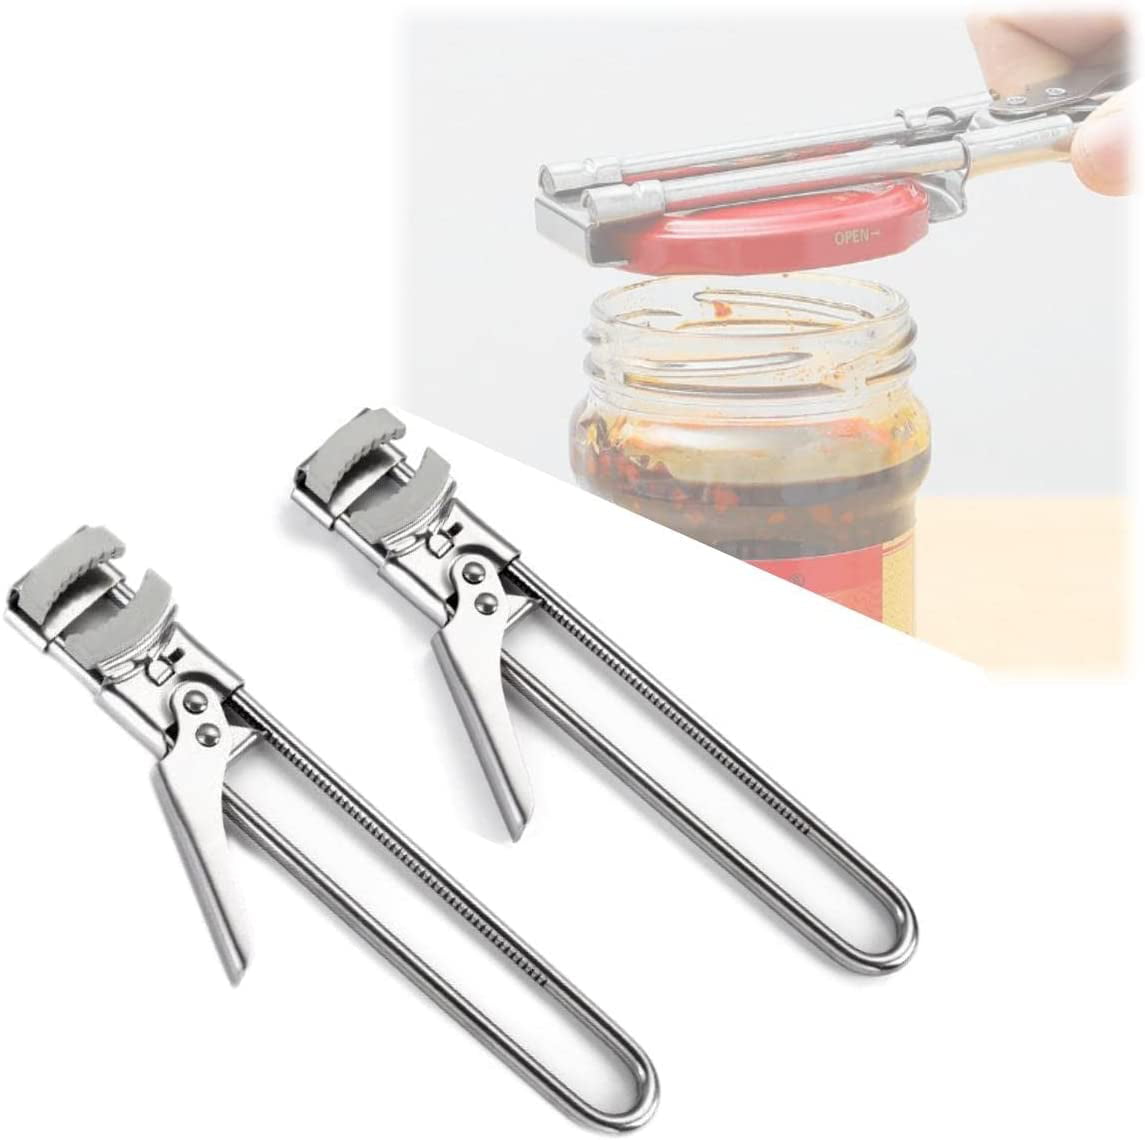 Adjustable Multifunctional Stainless Steel Can Opener，adjustable Stainless  Steel Can Opener，fullofcarts Jar Opener for Weak Handsfor Any-size Lids